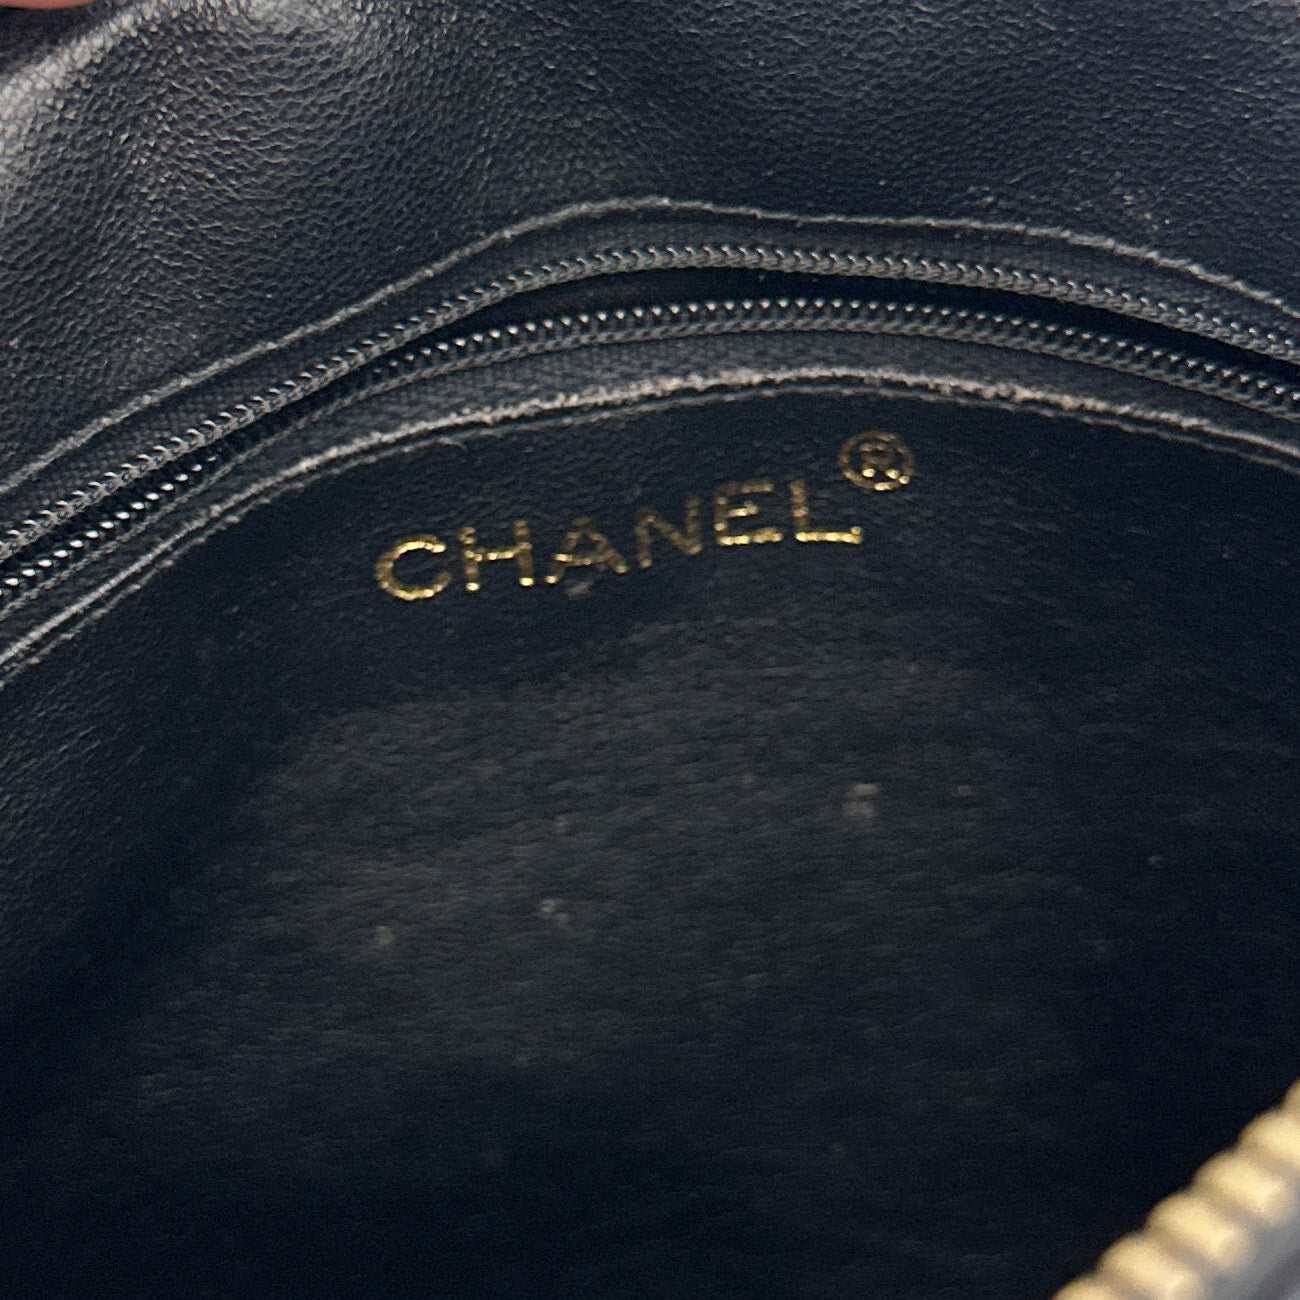 Chanel | CC Quilted Lambskin Camera Bag